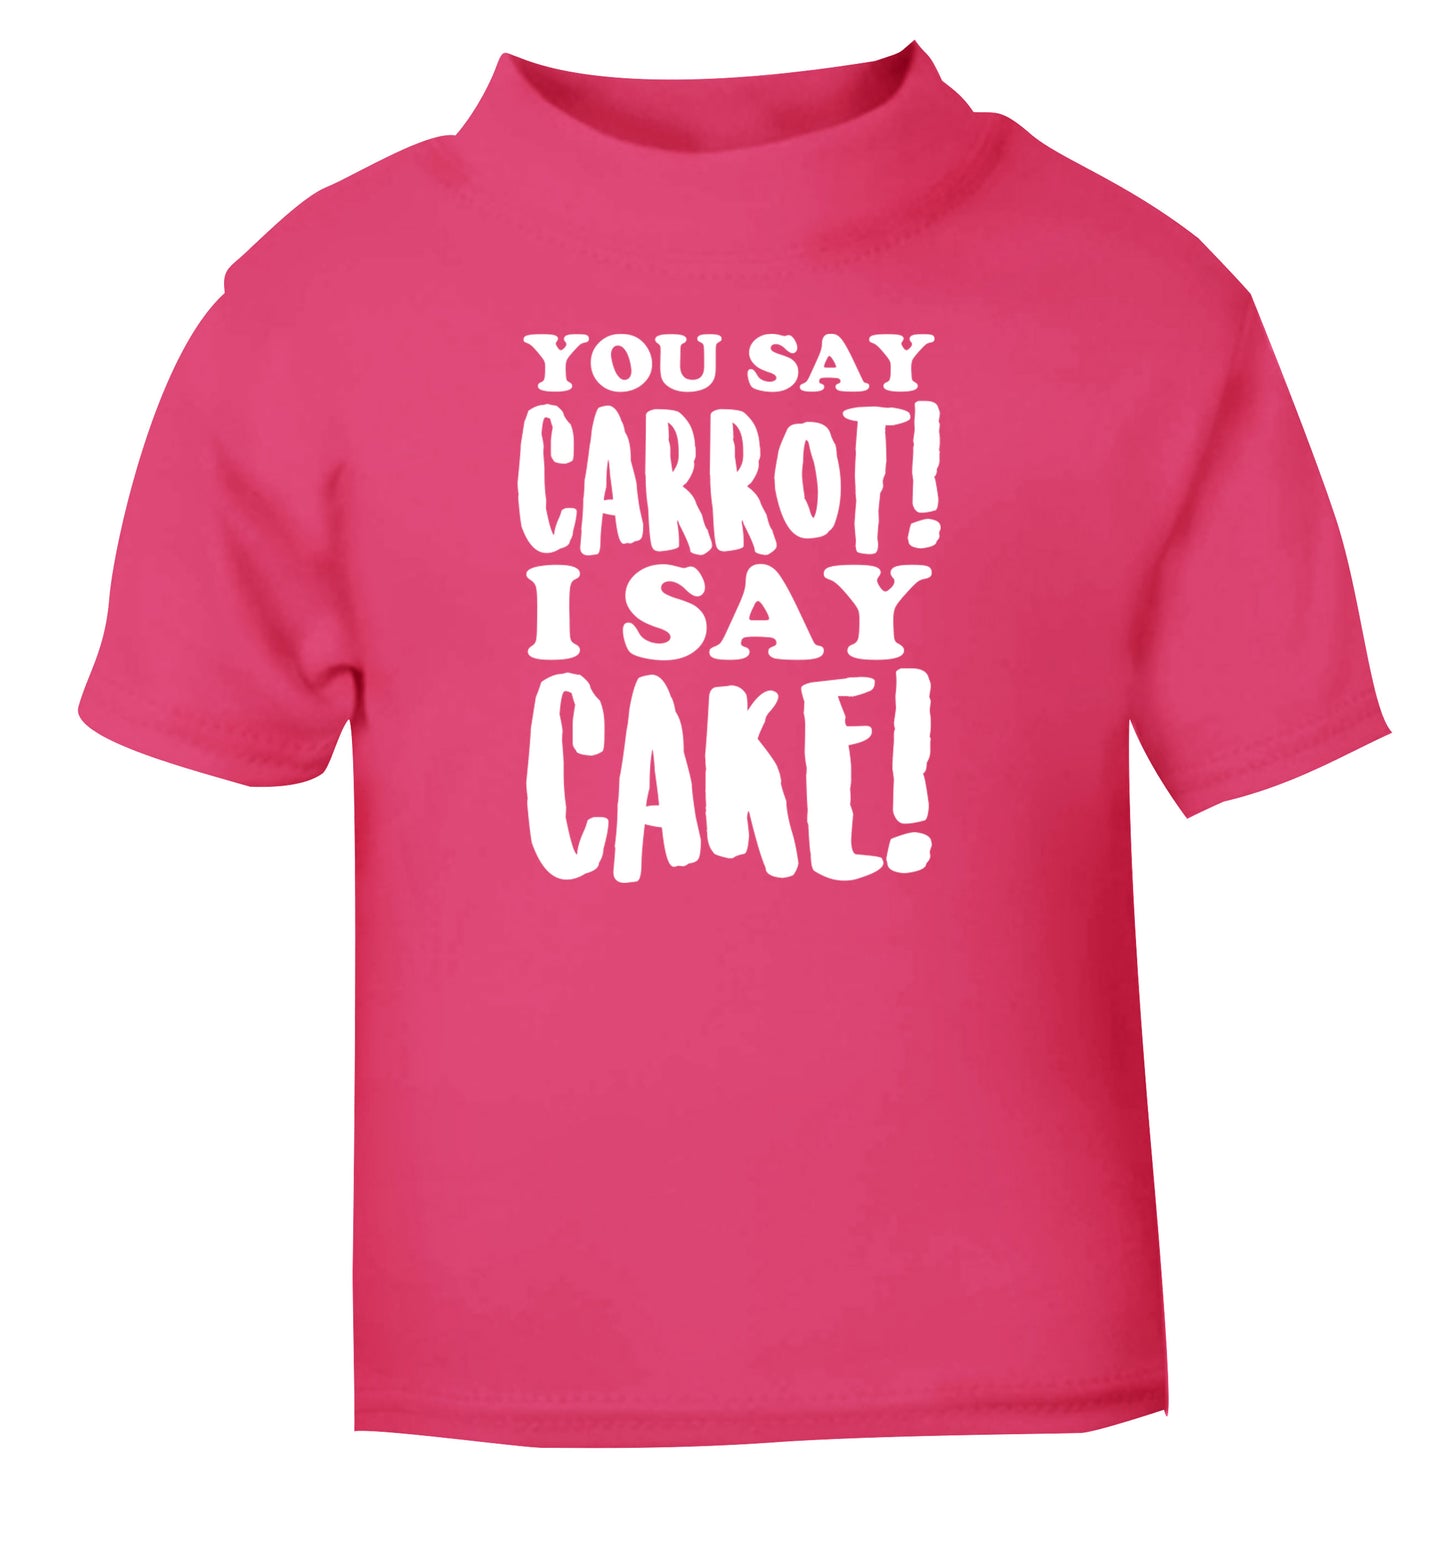 You say carrot I say cake! pink Baby Toddler Tshirt 2 Years